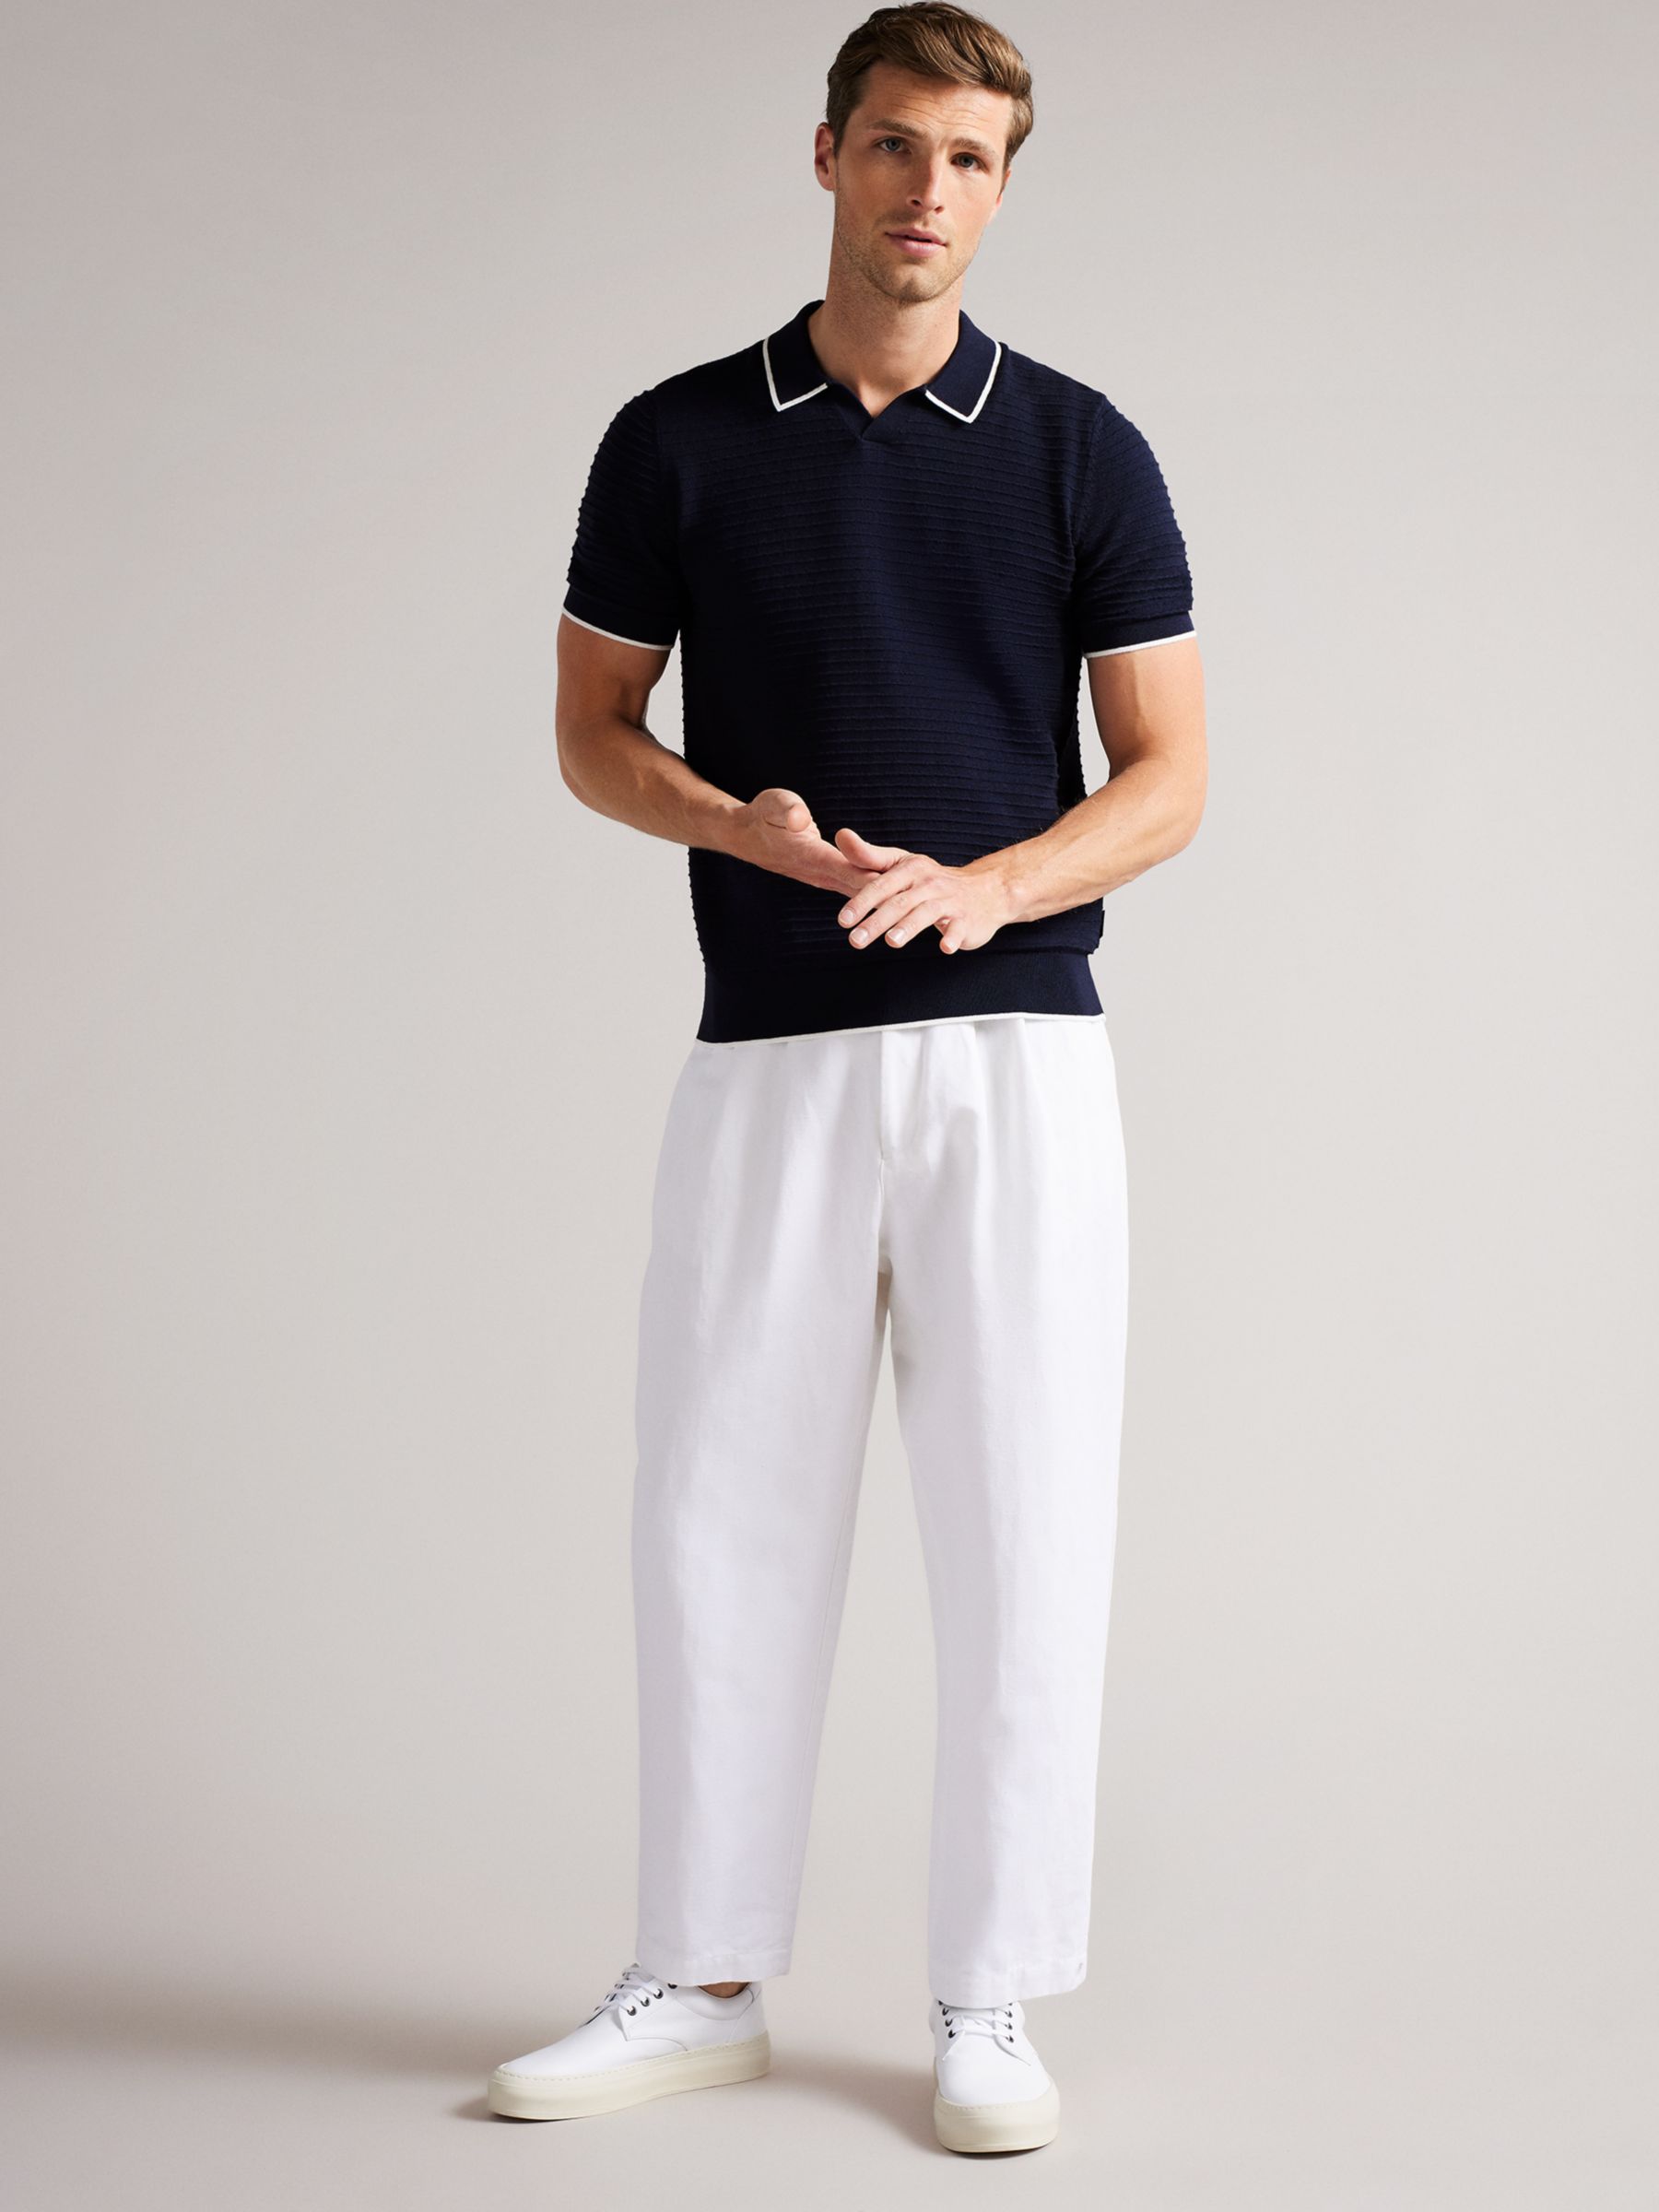 Ted Baker Durdle Textured Stripe Polo Shirt, Navy at John Lewis & Partners